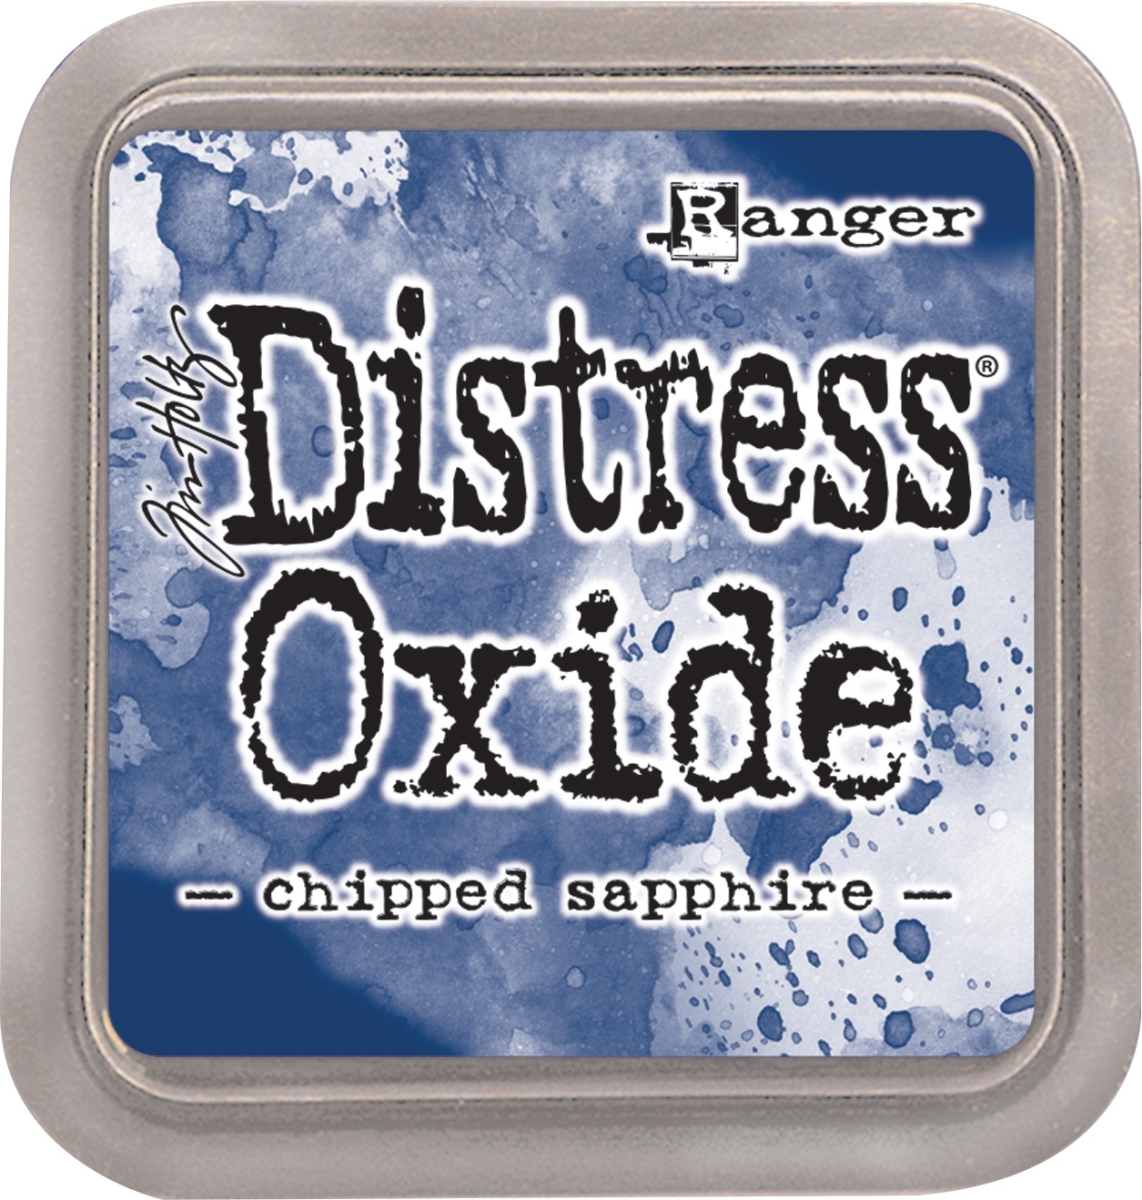 Tdo-55884 Tim Holtz Distress Oxides Ink Pad, Chipped Sapphire